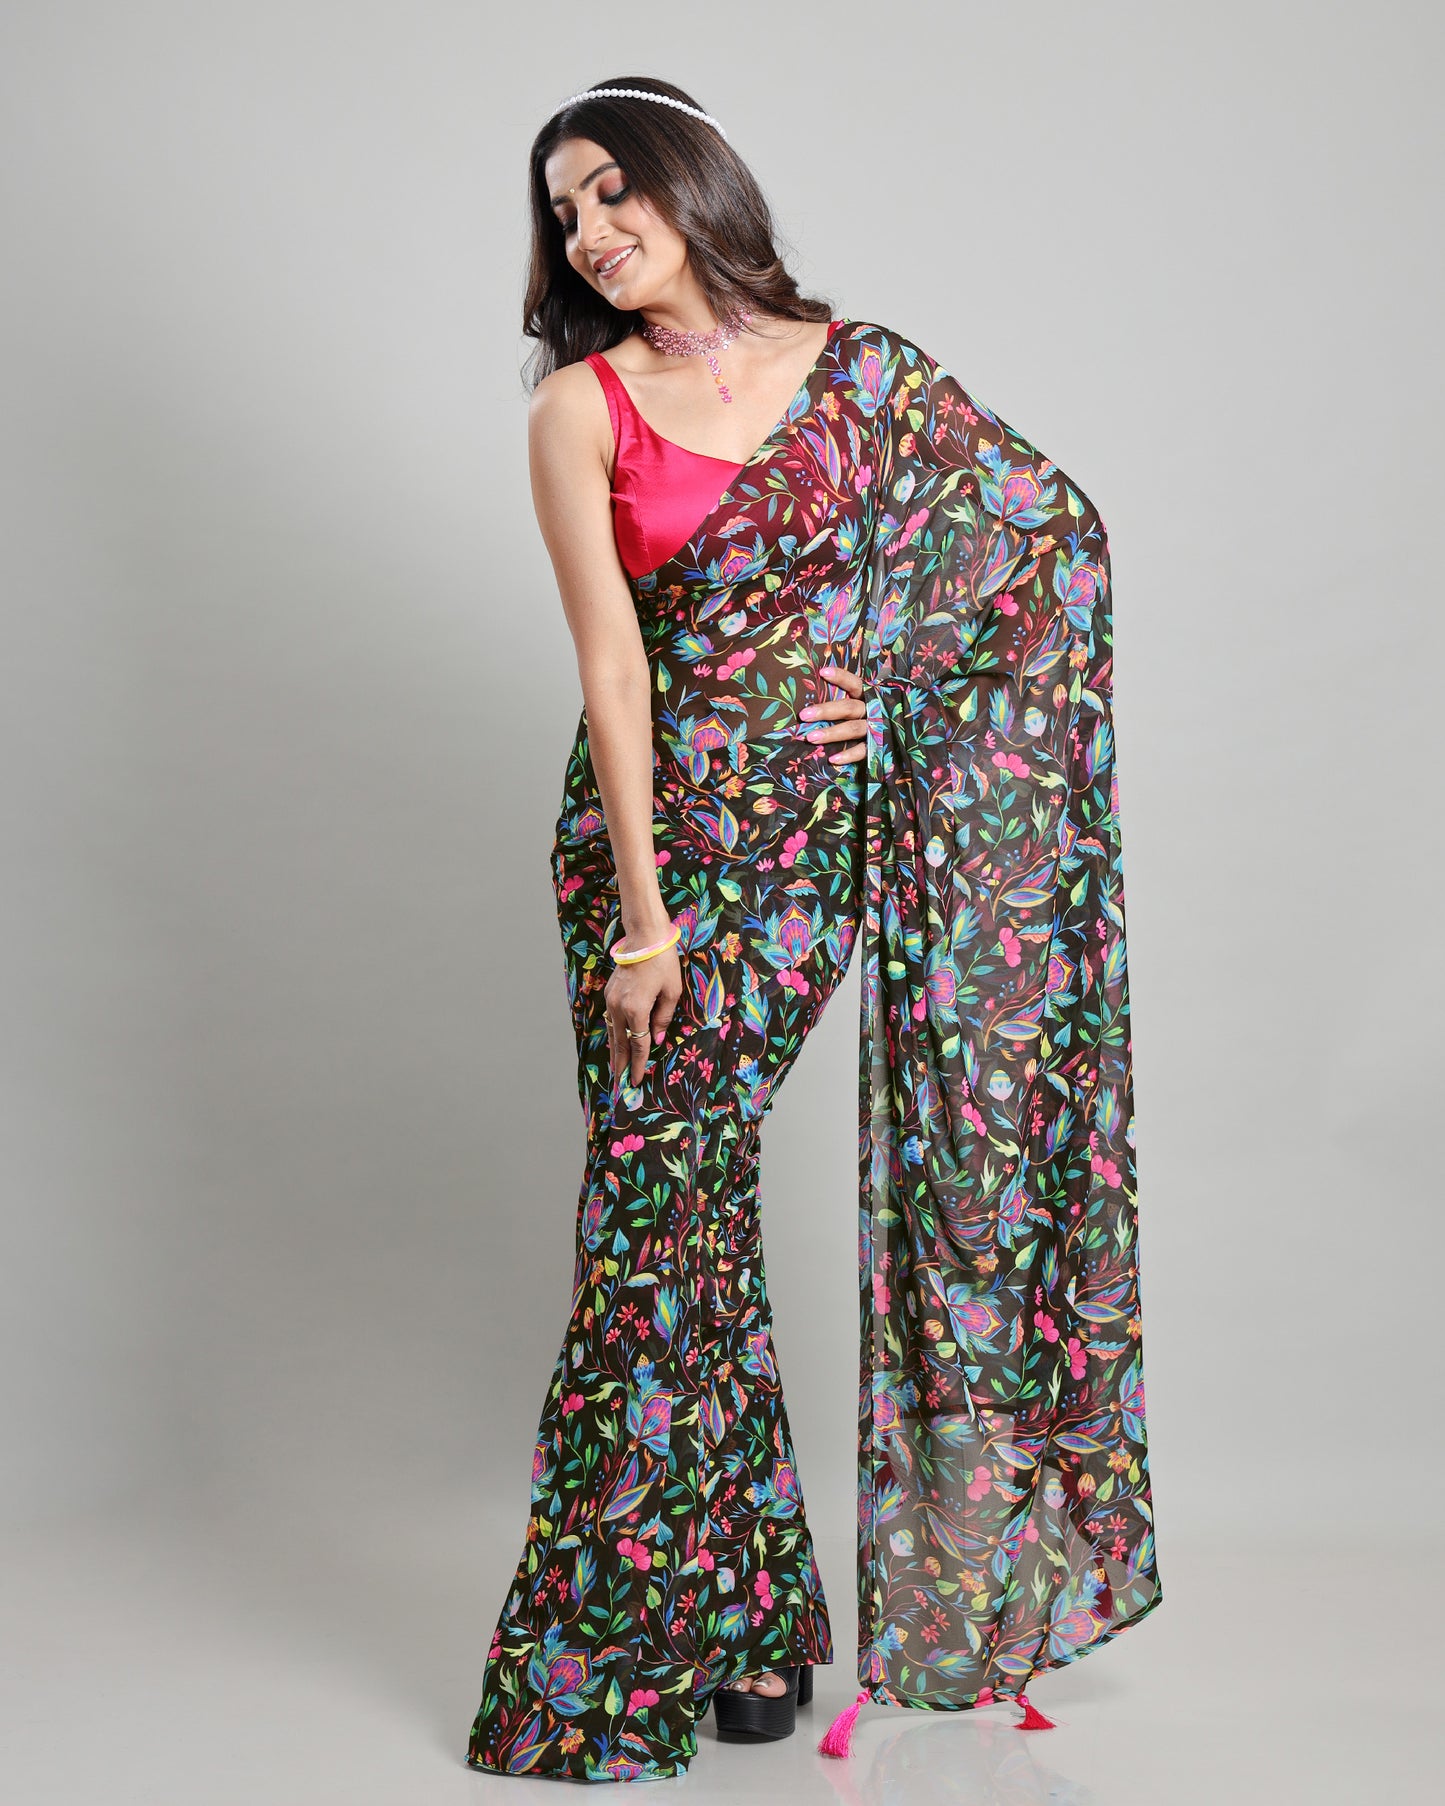 Beyond the Match: A Neon Floral Georgette Saree